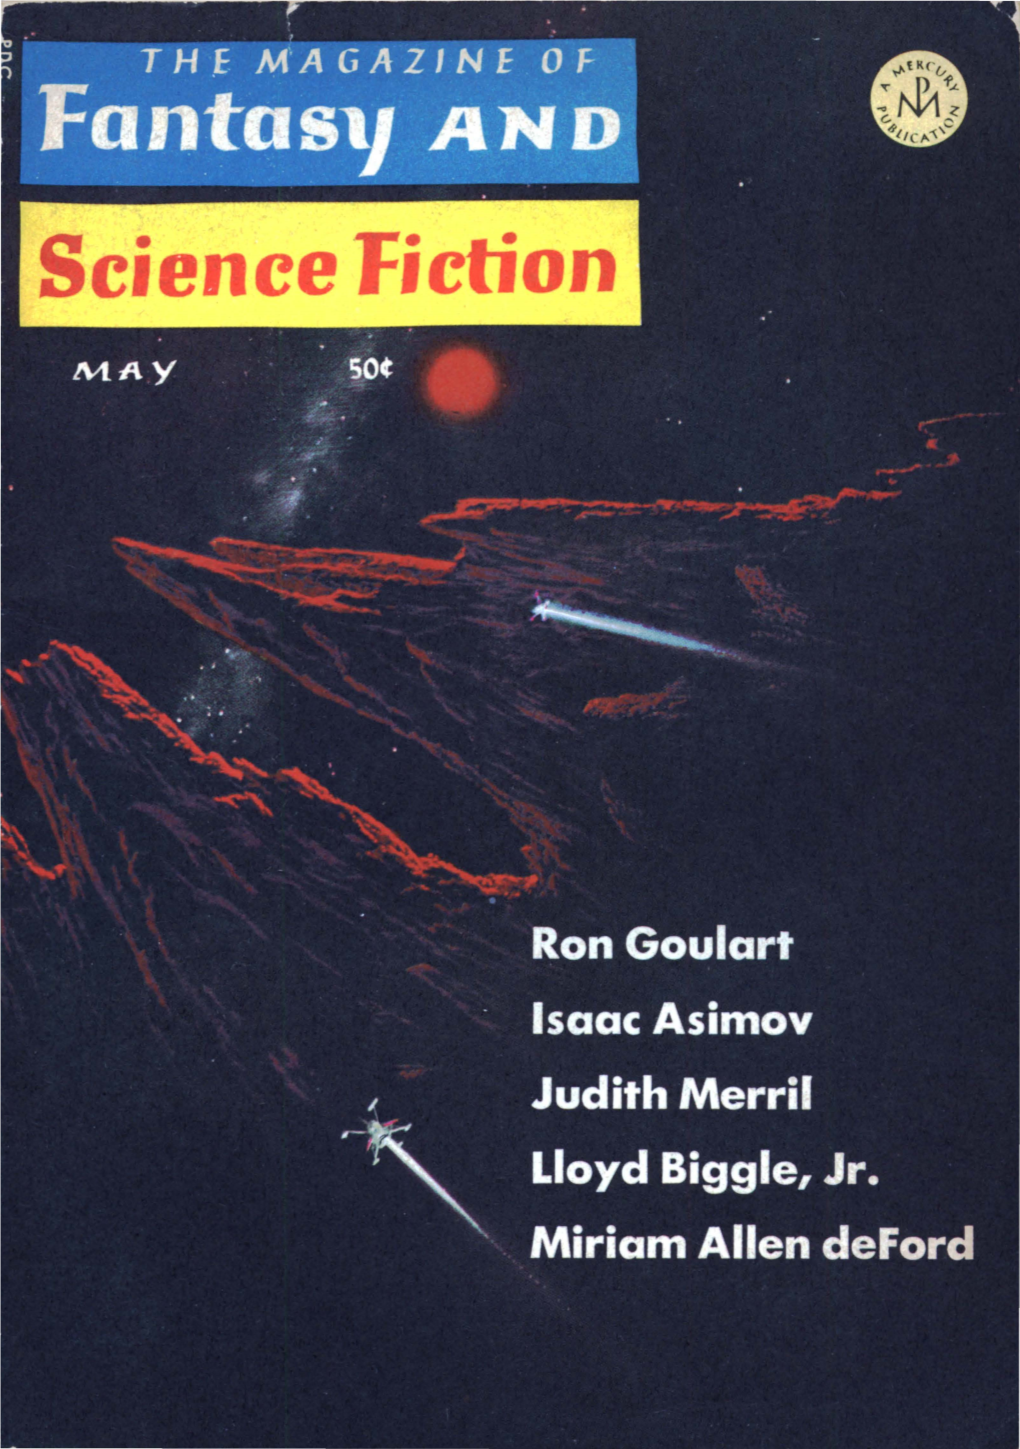 The Latest Issue of F&SF